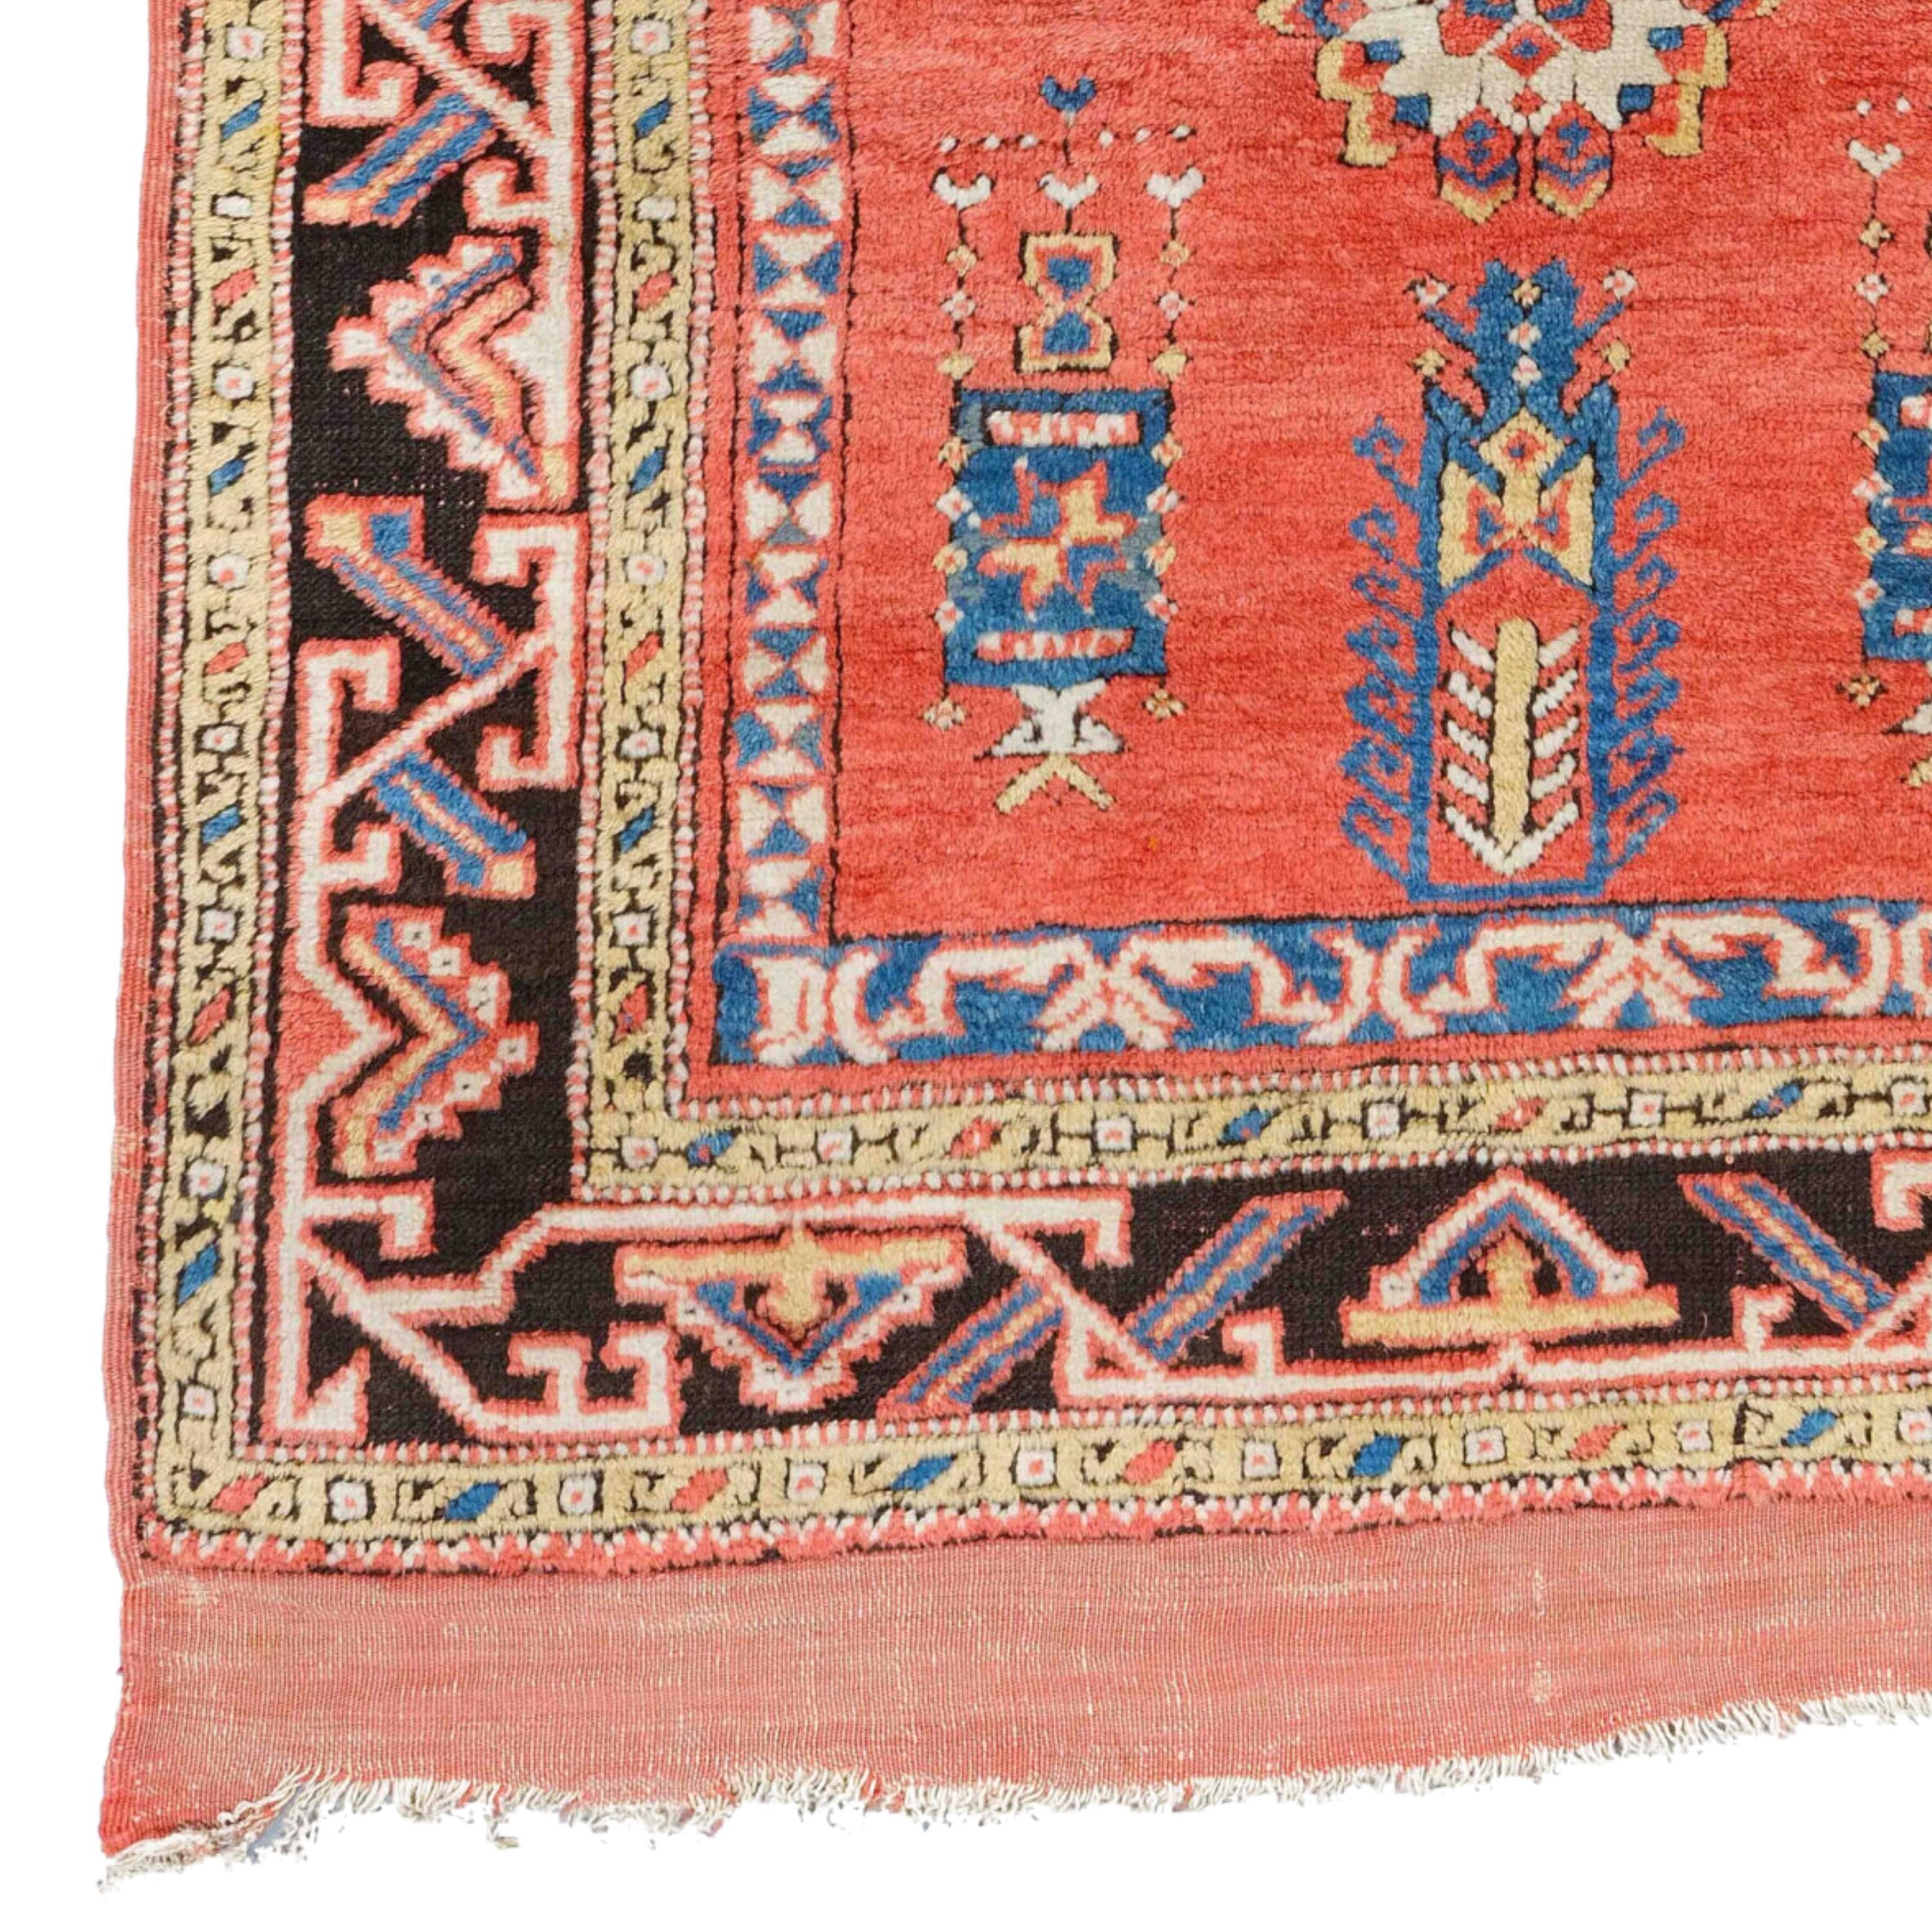 Early 19th Century Anatolian Prayer Bergama Rug in Perfect Condition Size 110 x 150 cm (3,6 x 4,92 ft)

Red, blue, and white, are highly varied. Several designs, showing rows of panels or central medallion designs, preserve the fashions of much